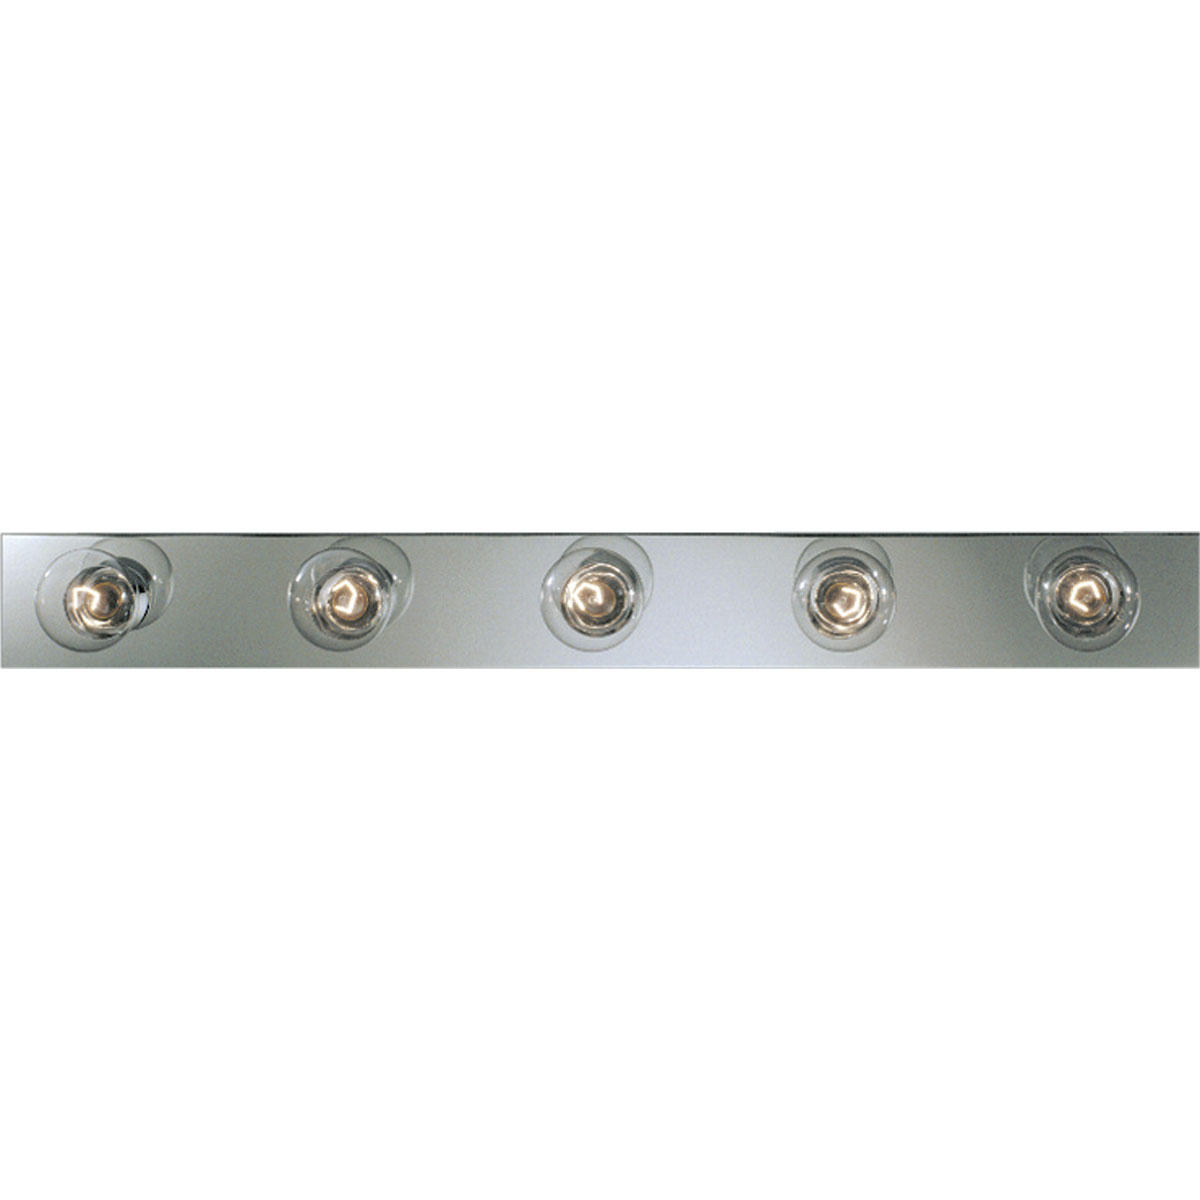 Basic Broadway Lighting strips use fewer lamps to lower the overall wattage per strip. This five-light bath strip with sockets on 7-1/2 inch centers gives an even spread of illumination. UL listed for ceiling mounting with 25w maximum lamps. Complete with a brilliant metallic finish.